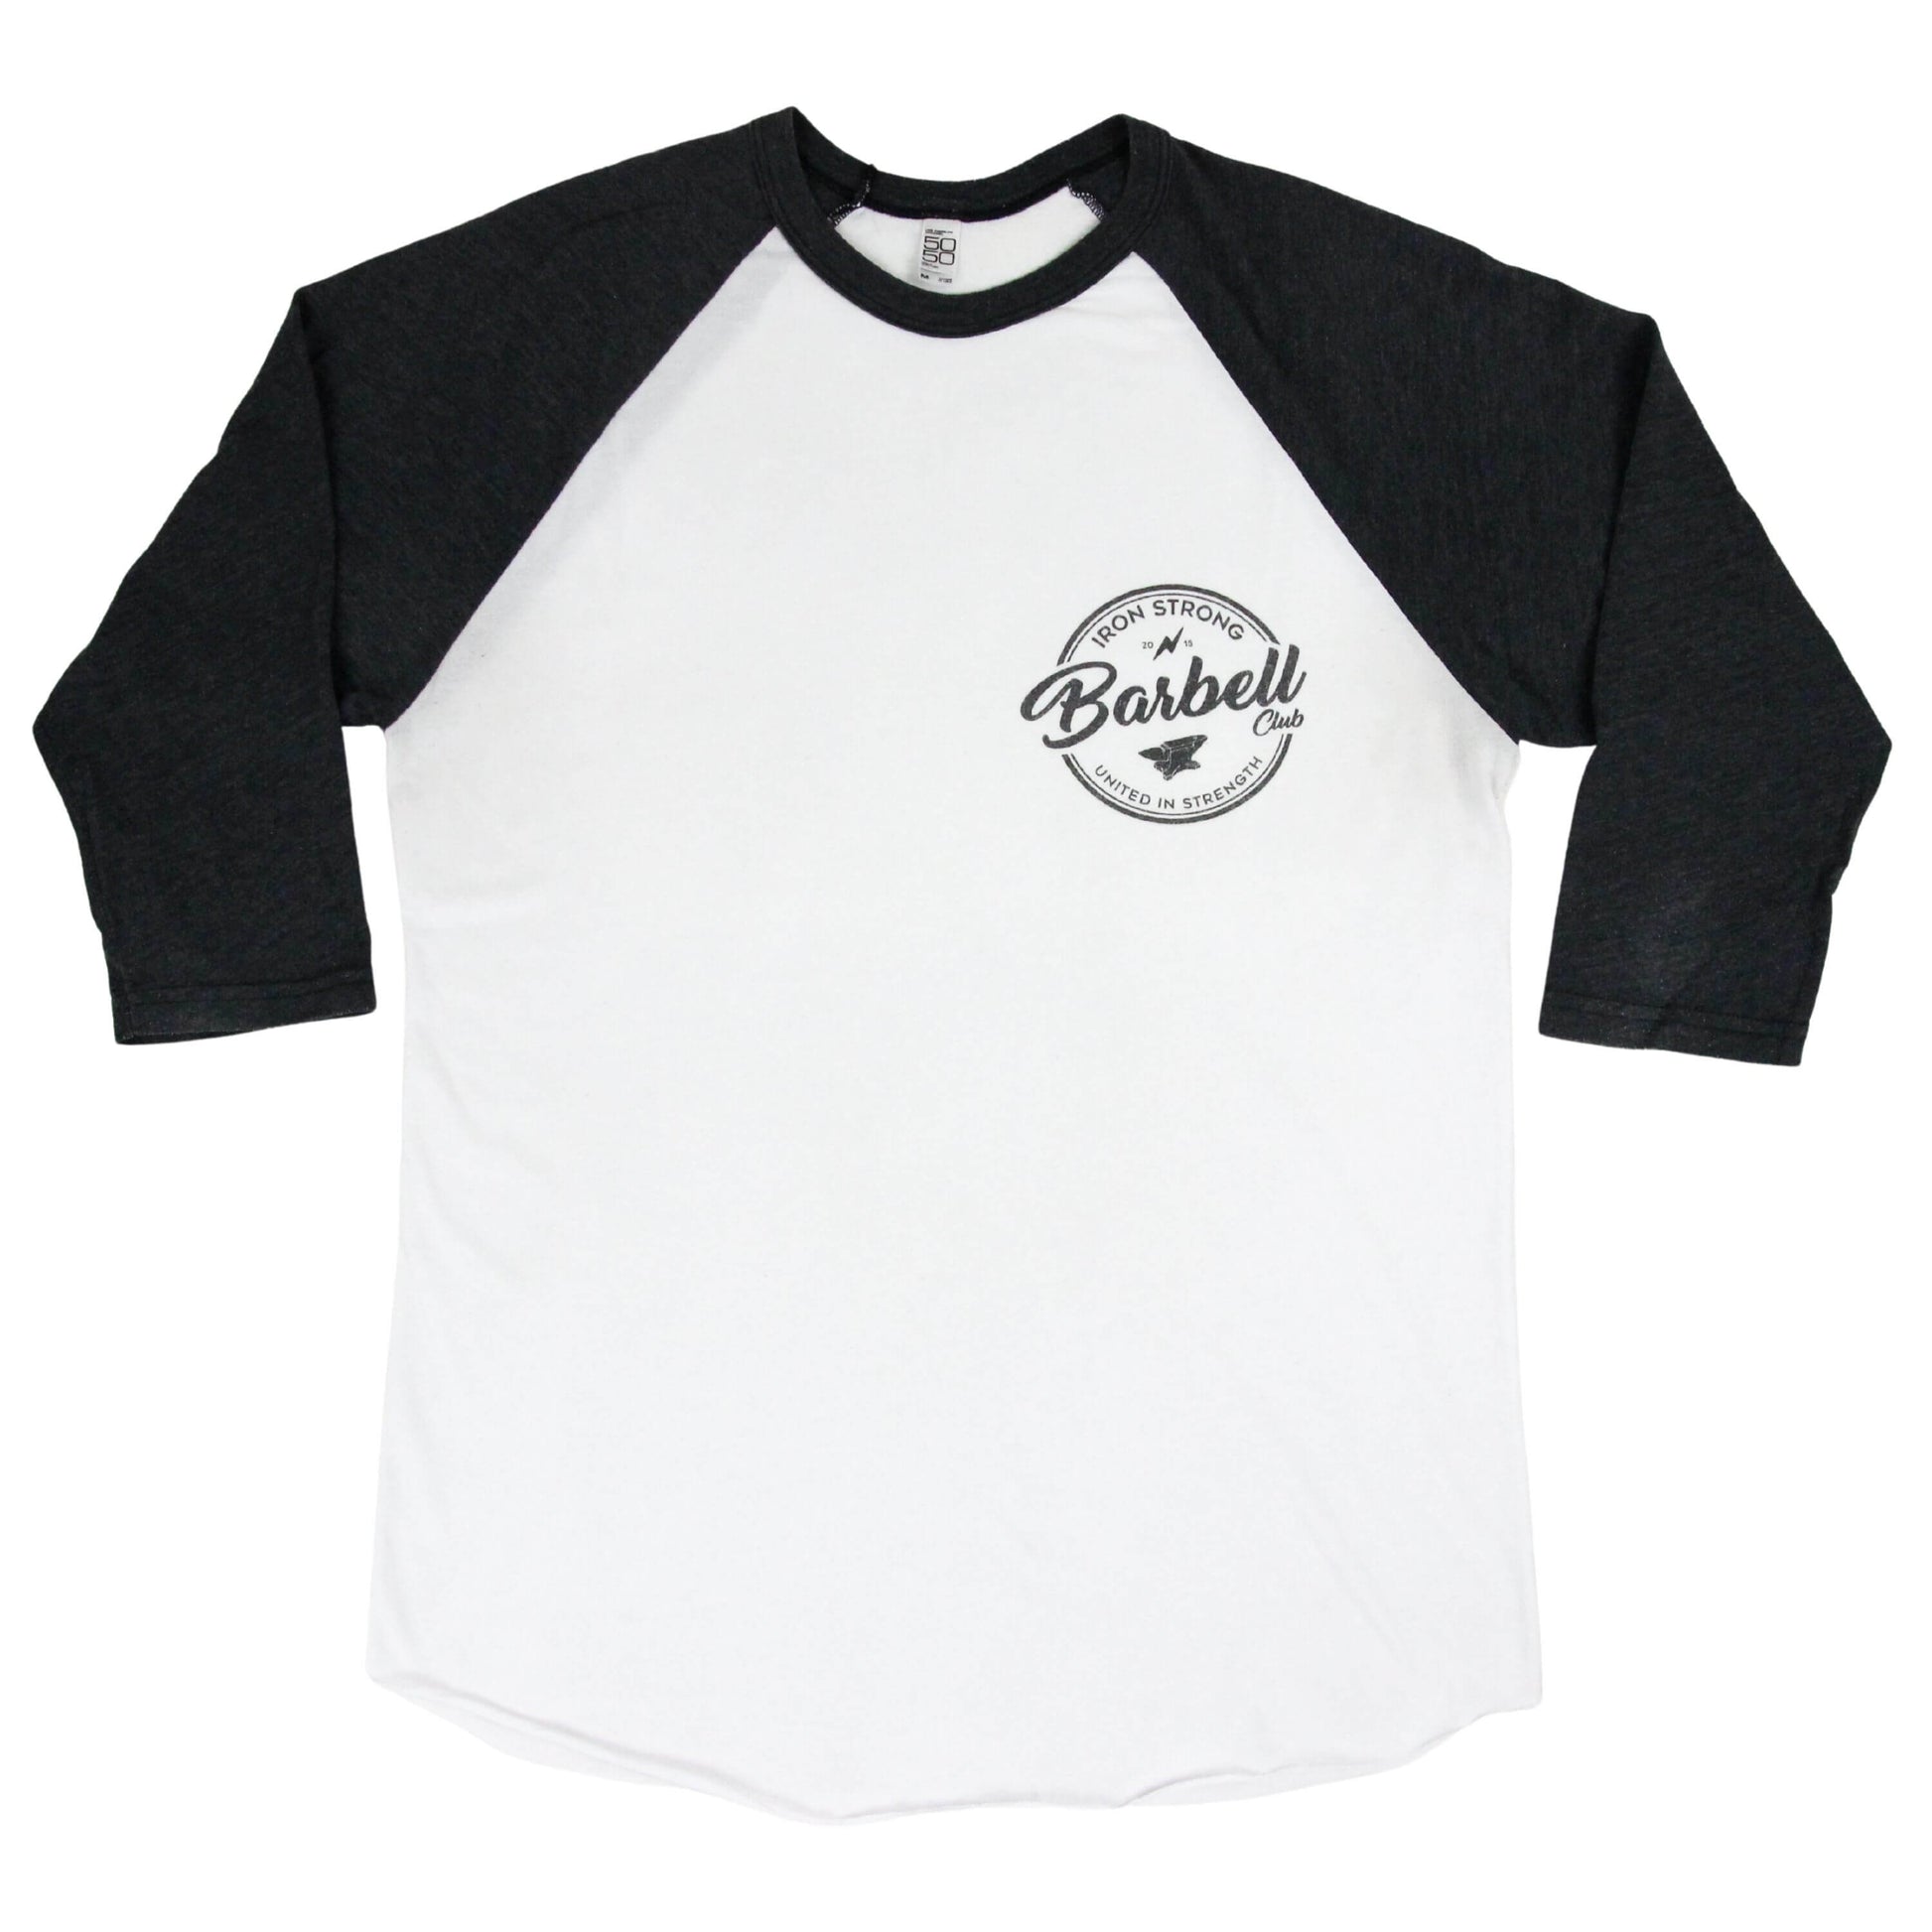 The 'Barbell Club 2.0' 3/4 Sleeve Lifestyle Shirt – Iron Strong